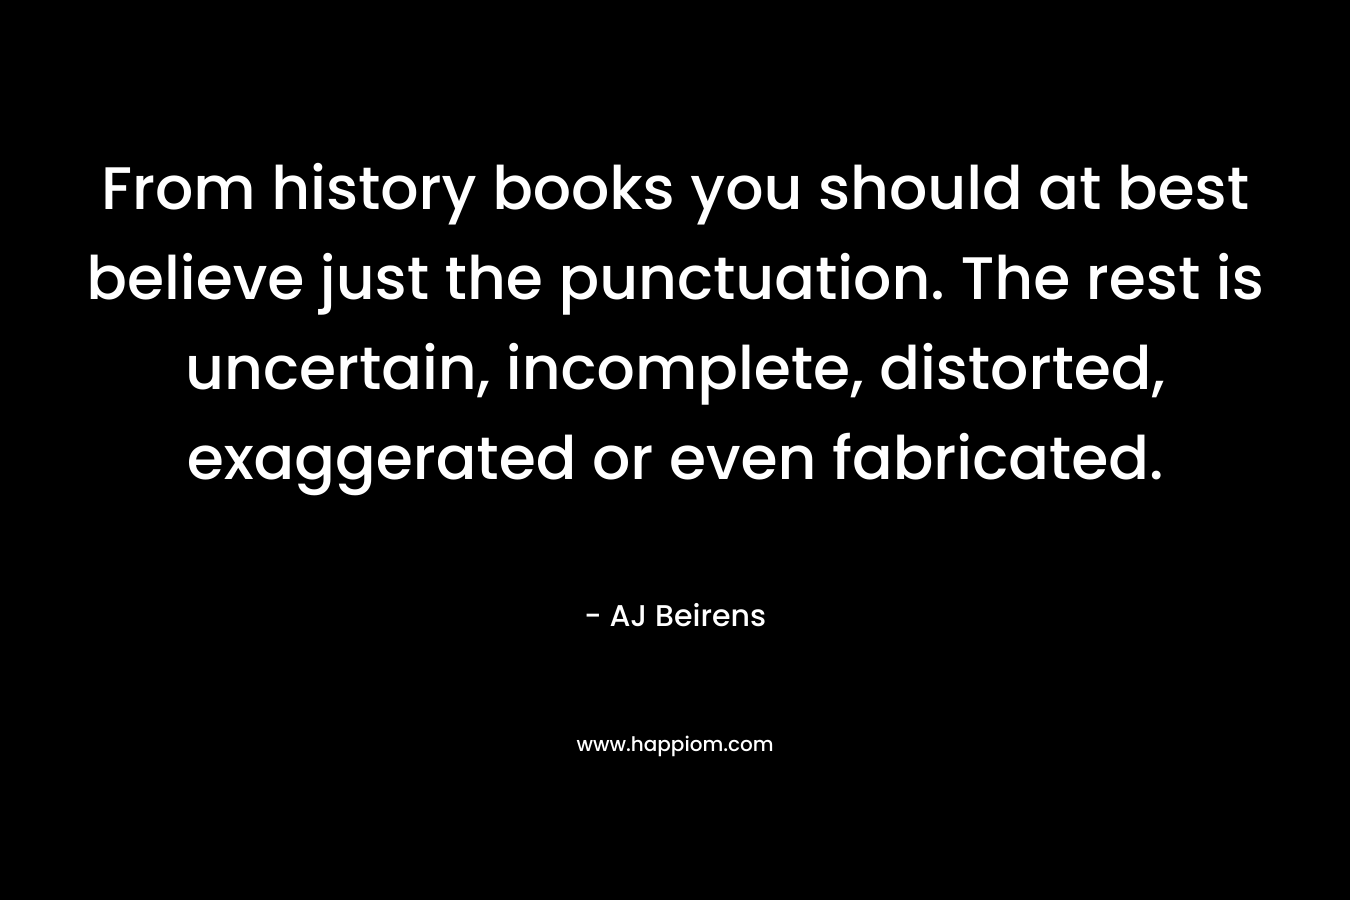 From history books you should at best believe just the punctuation. The rest is uncertain, incomplete, distorted, exaggerated or even fabricated. – AJ Beirens